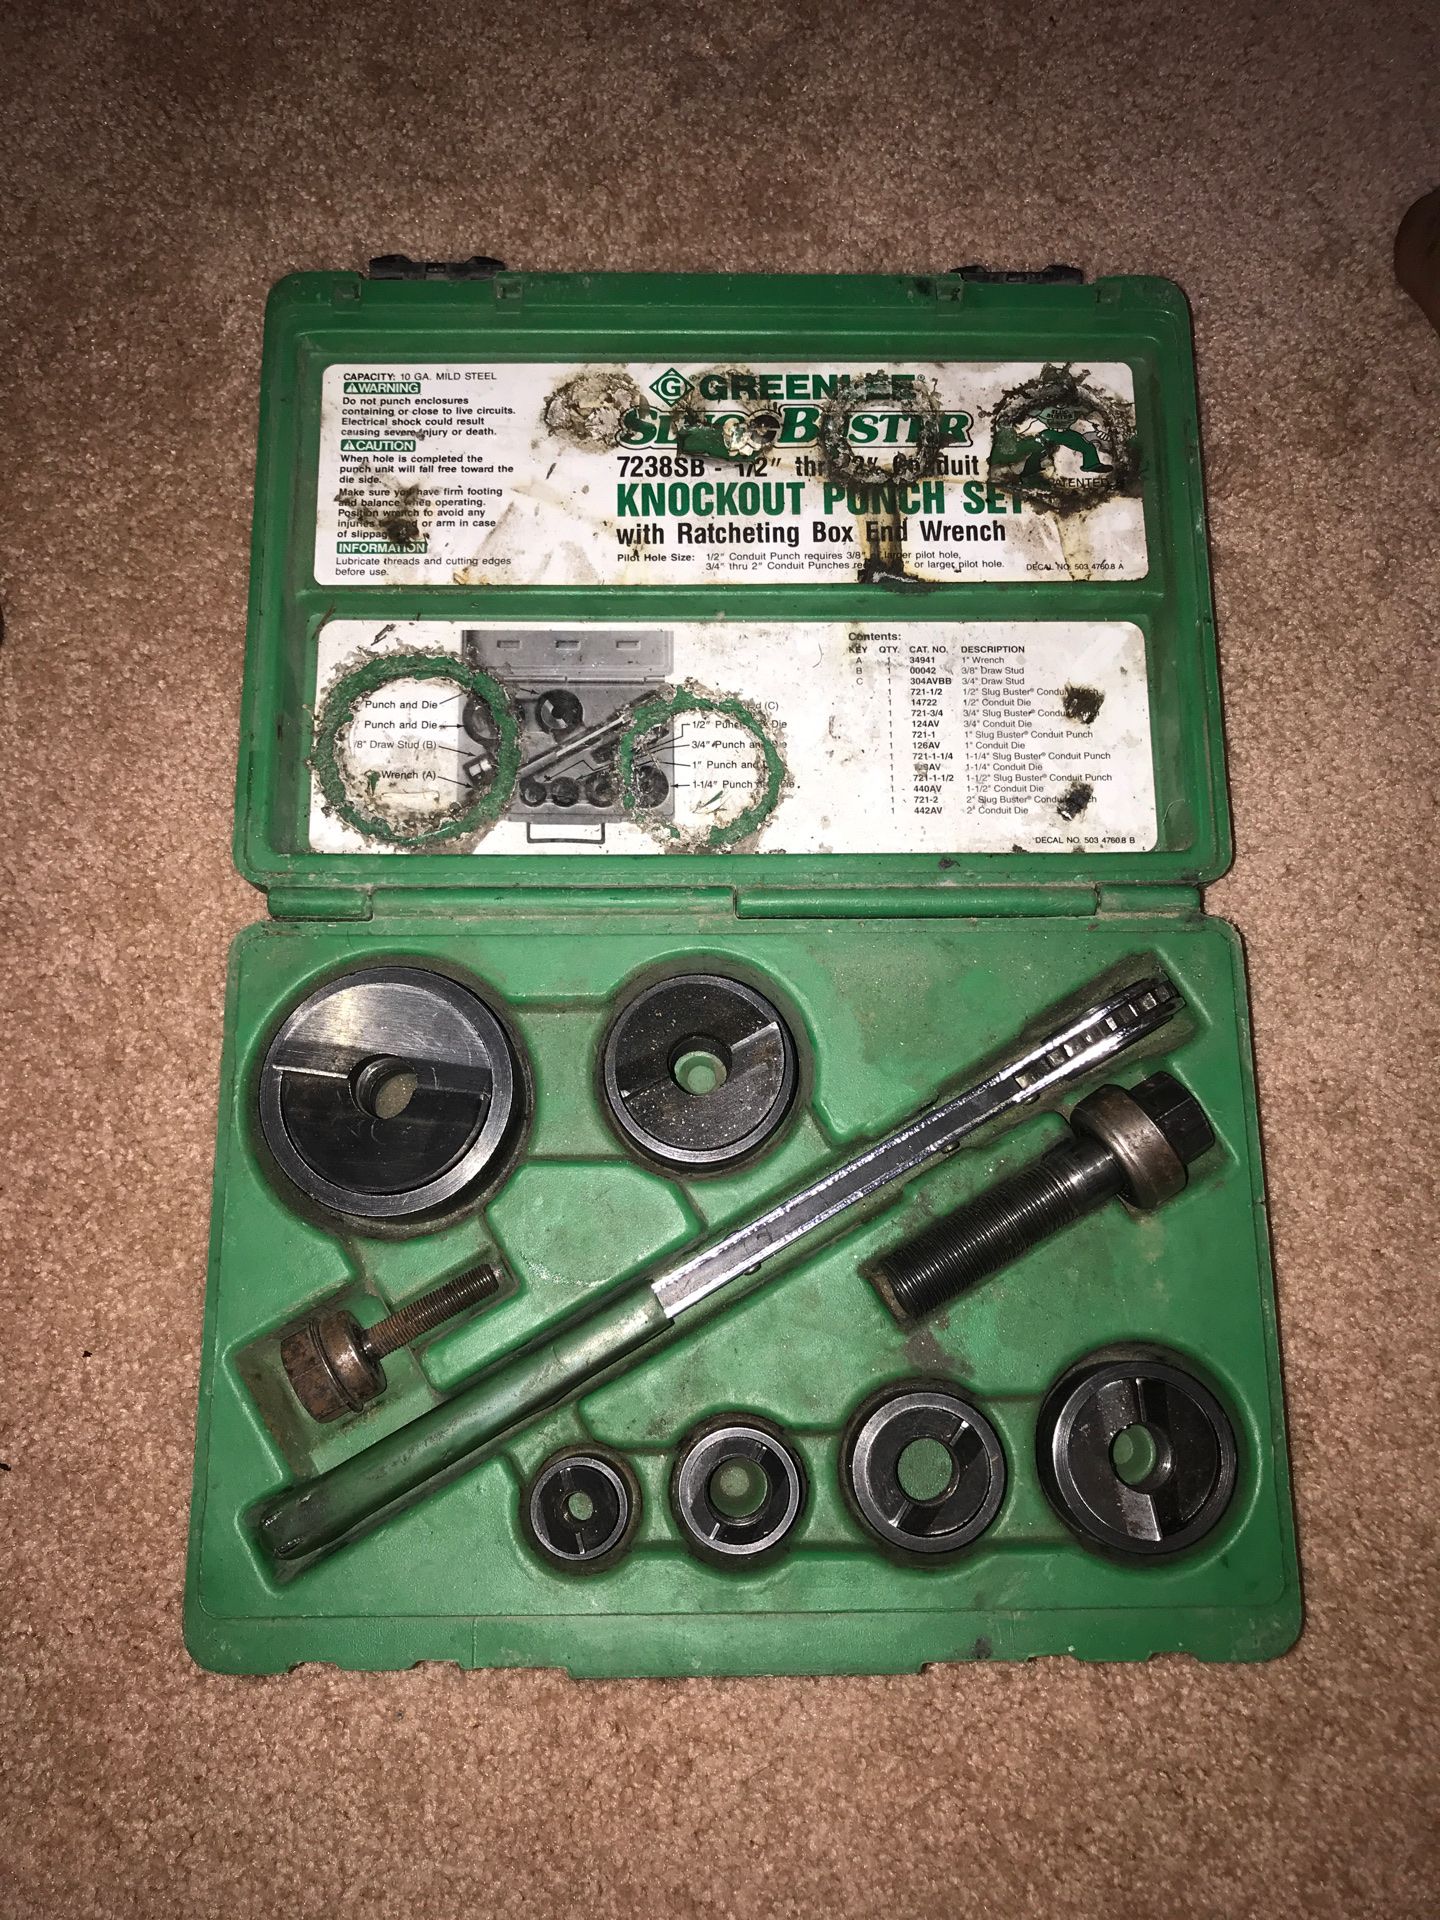 Knockout punch tool set